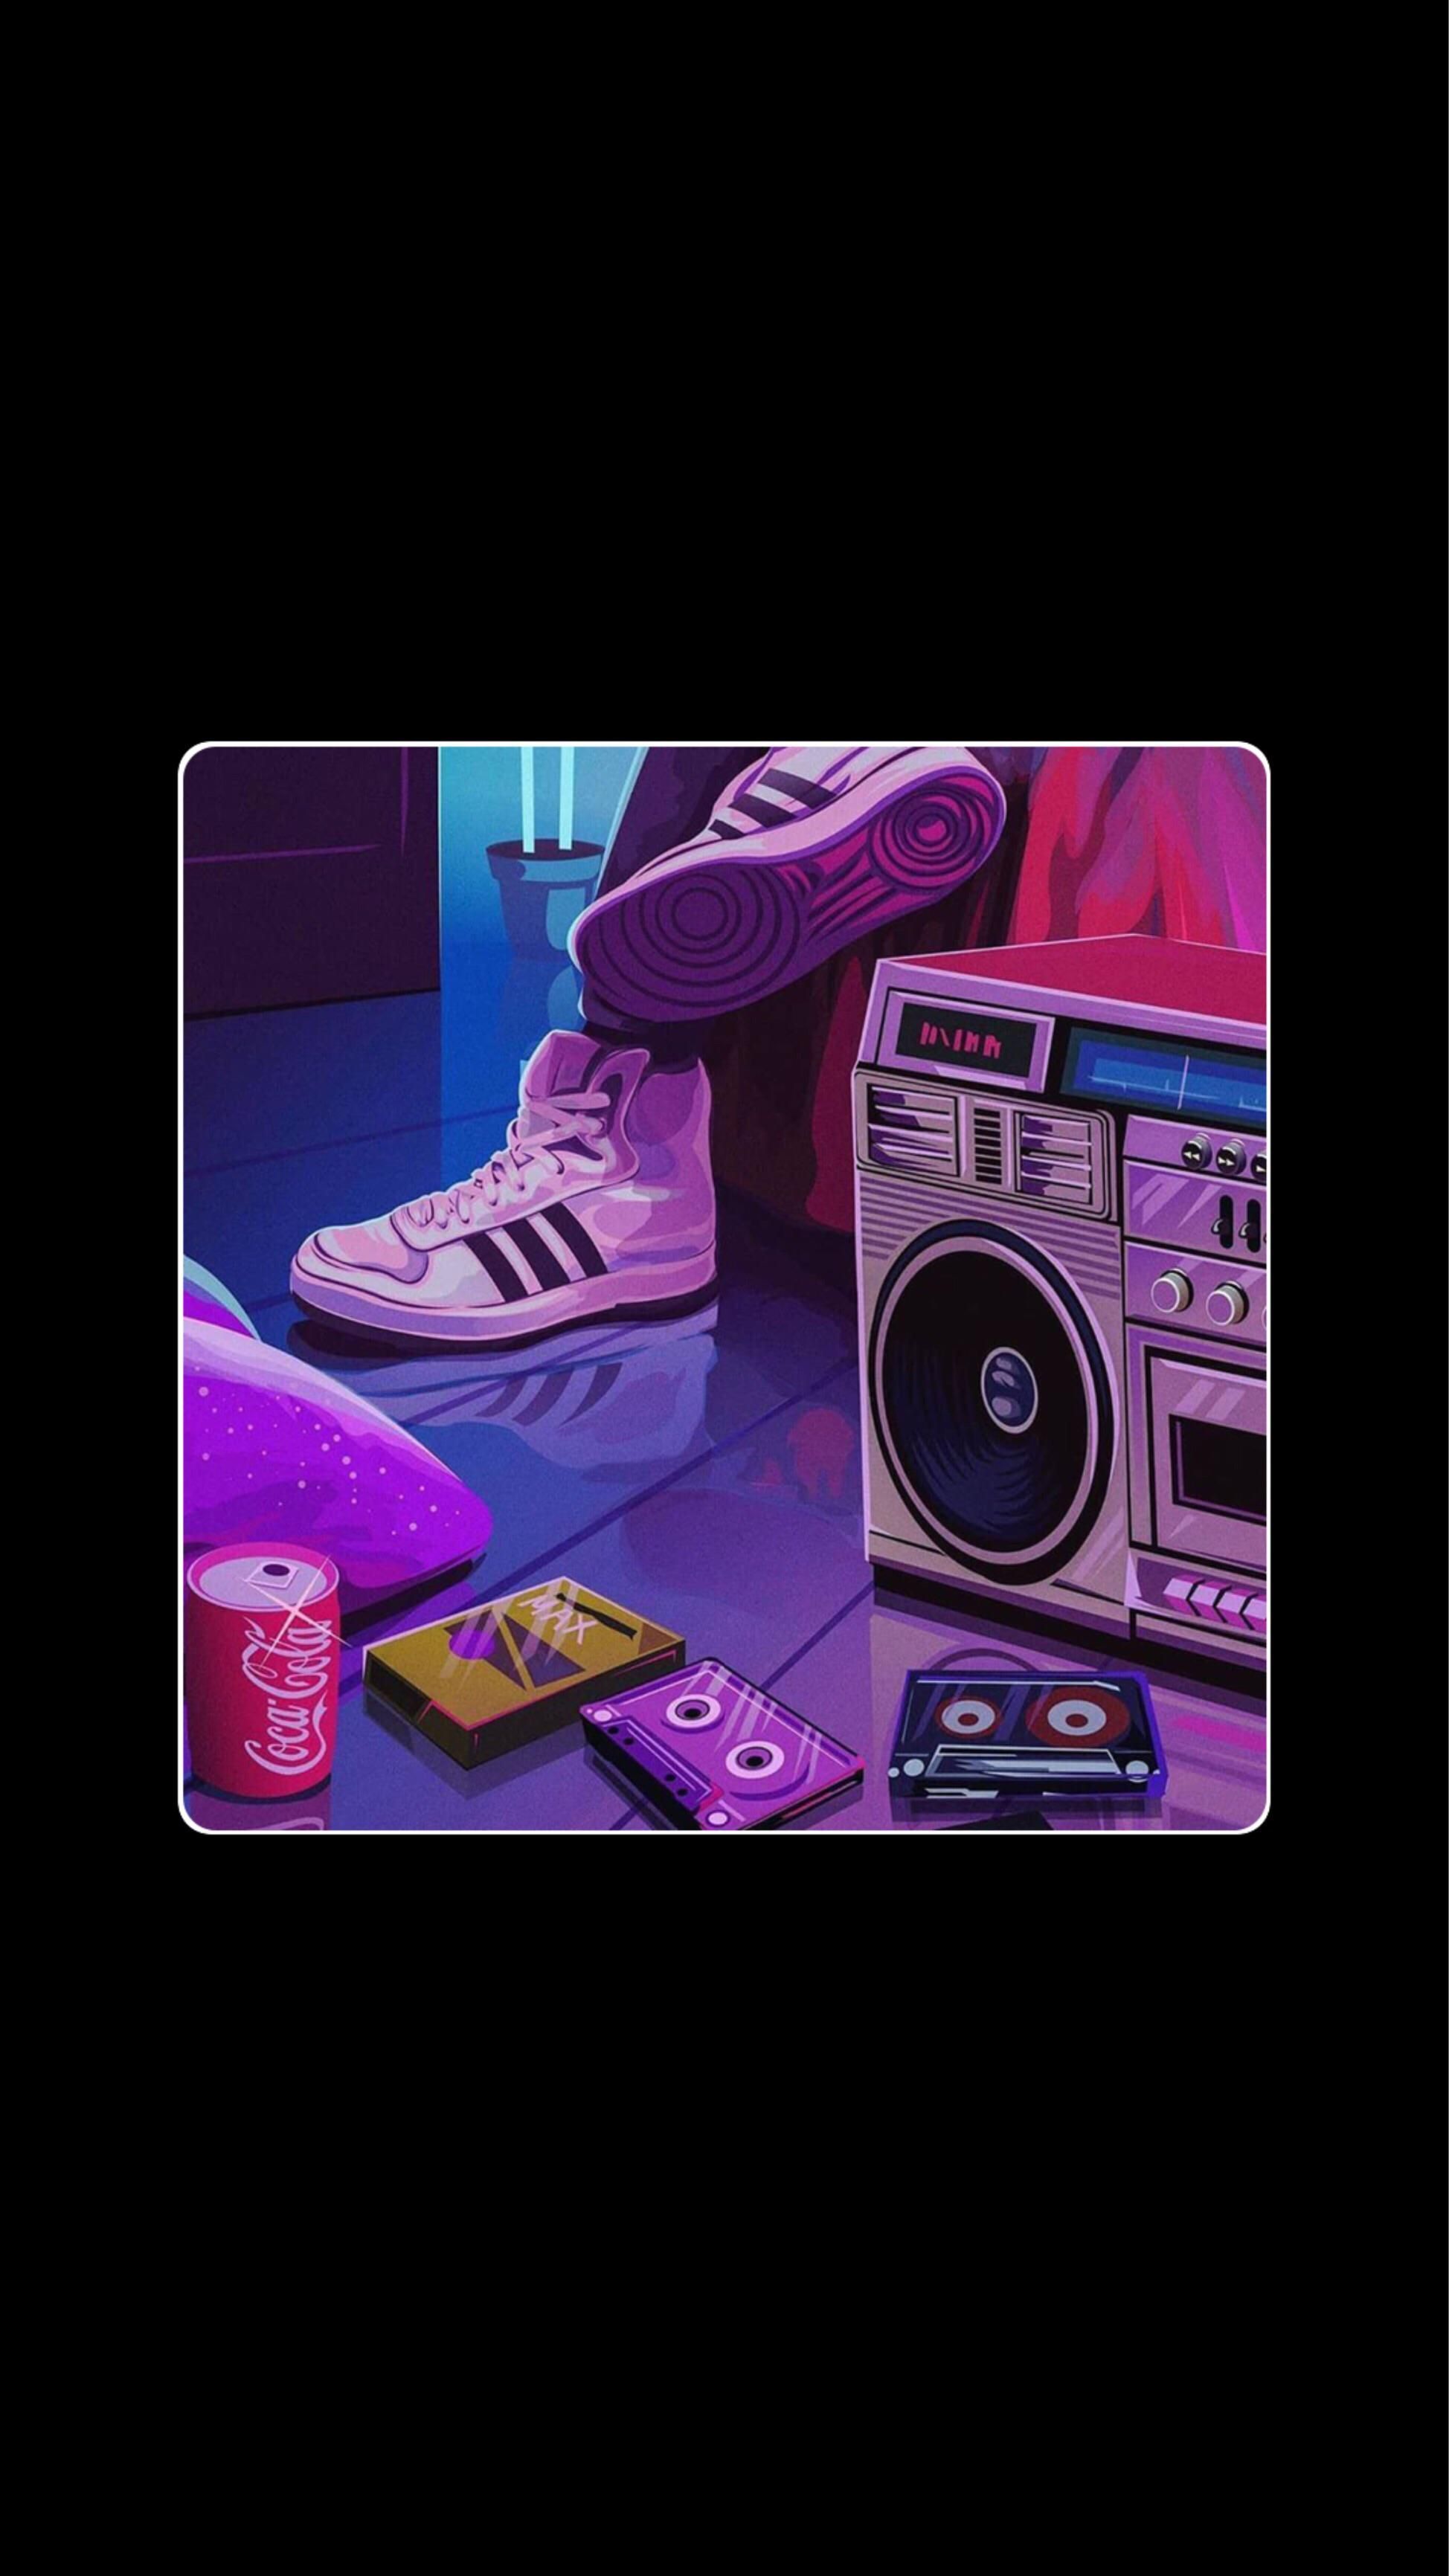 Full Picture Was Found On R Outrun. Vaporwave Wallpaper, Synthwave Art, IPhone Wallpaper Vintage